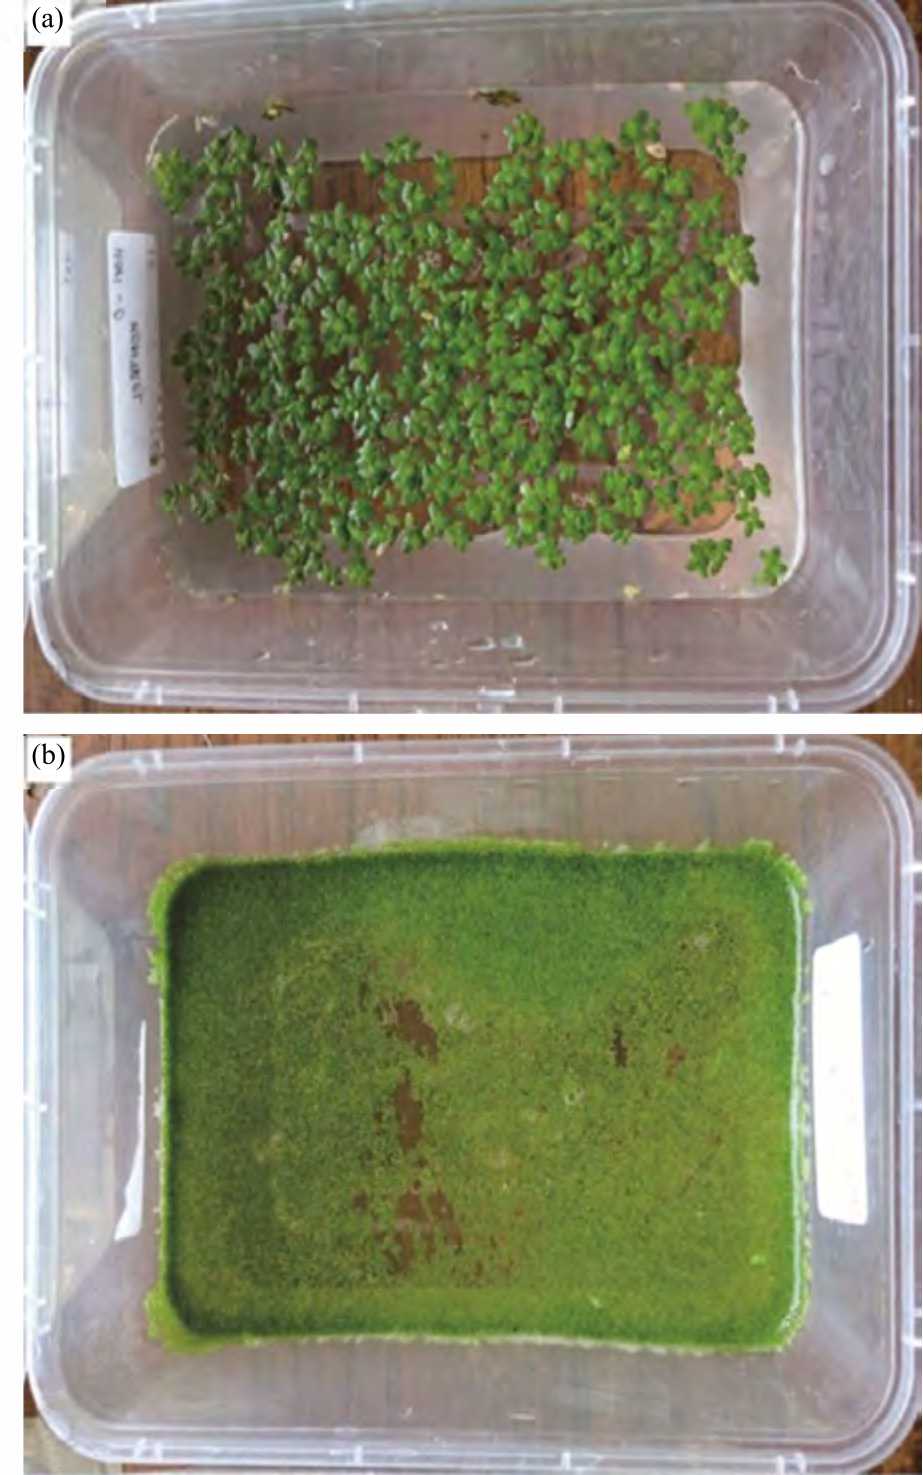 Image for - Protein and Lipid Composition of Duckweeds (Landoltia punctata and Wolffia arrhiza) Grown in a Controlled Cultivation System